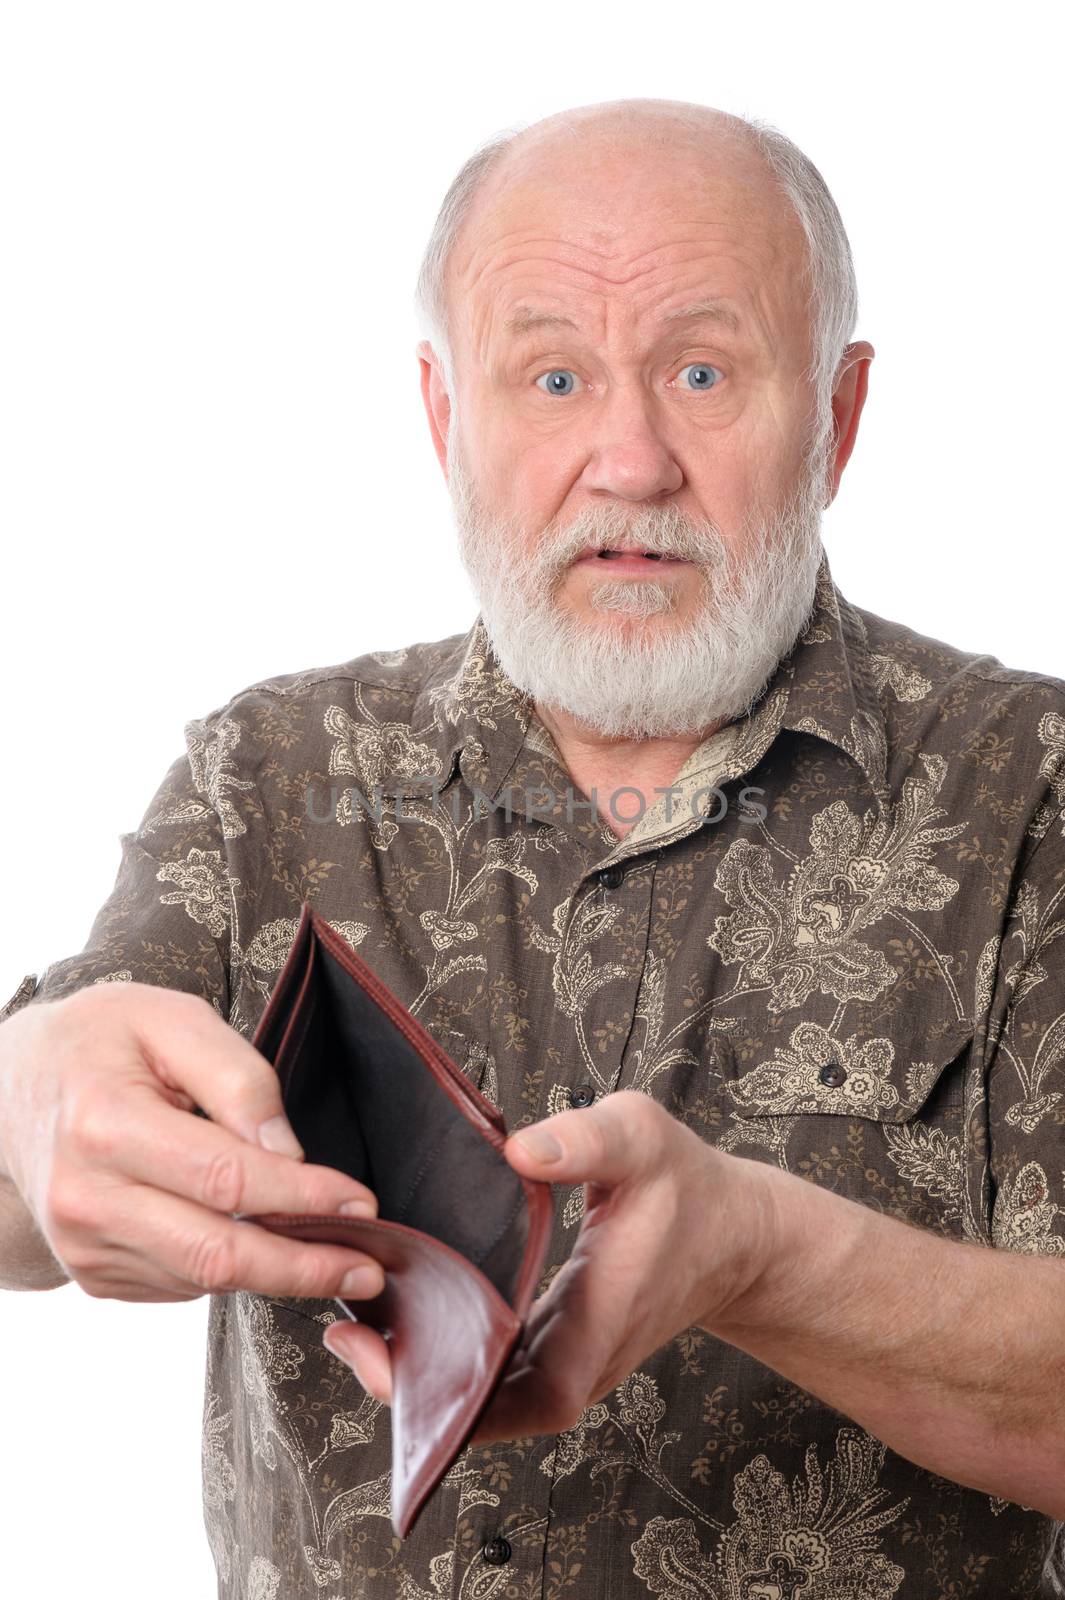 Handsome bald and bearded senior man shows empty purse, isolated on white background